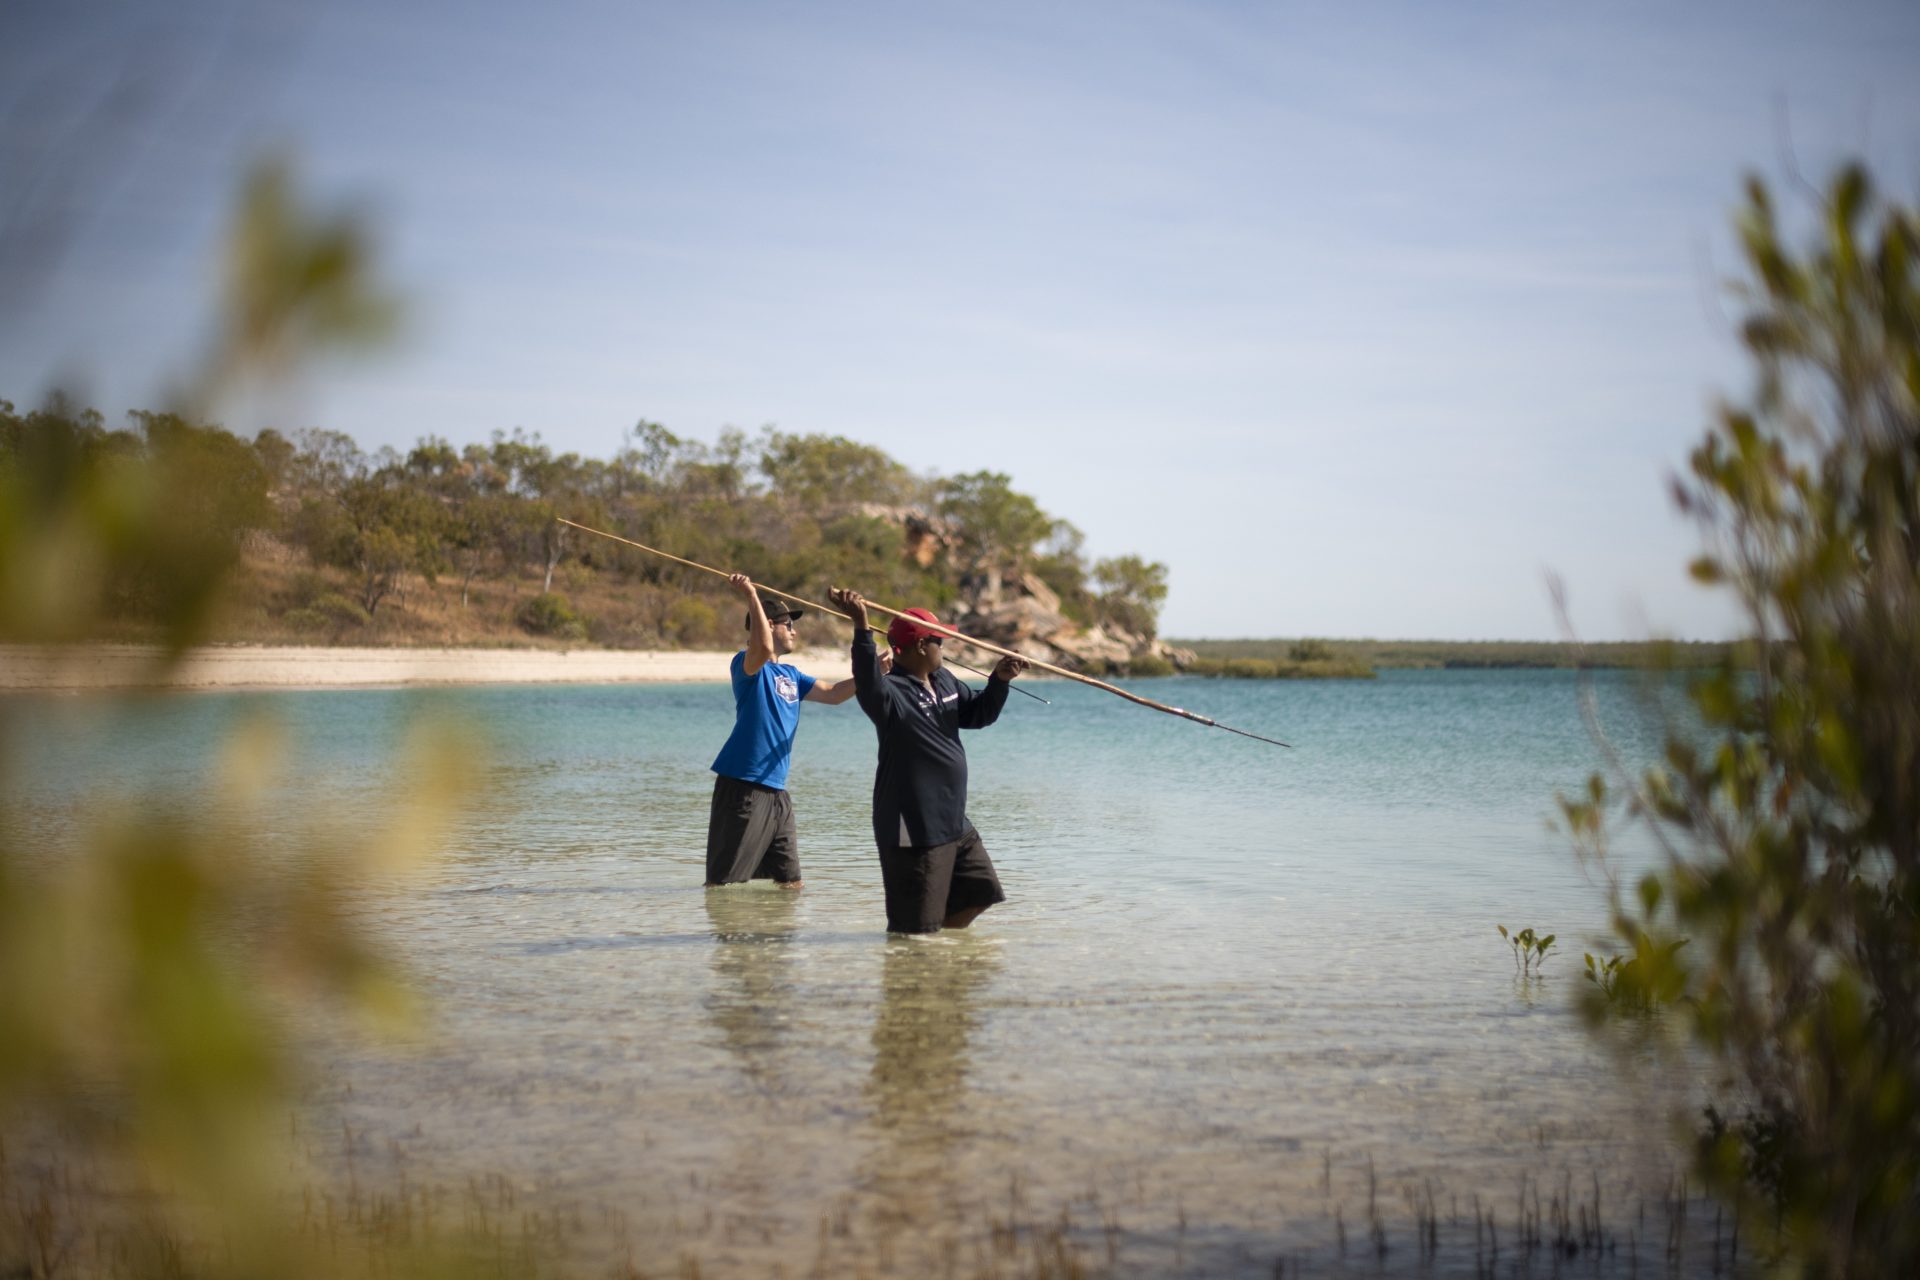 Spearfishing with Bolo, Kooljaman at Cape Leveque.